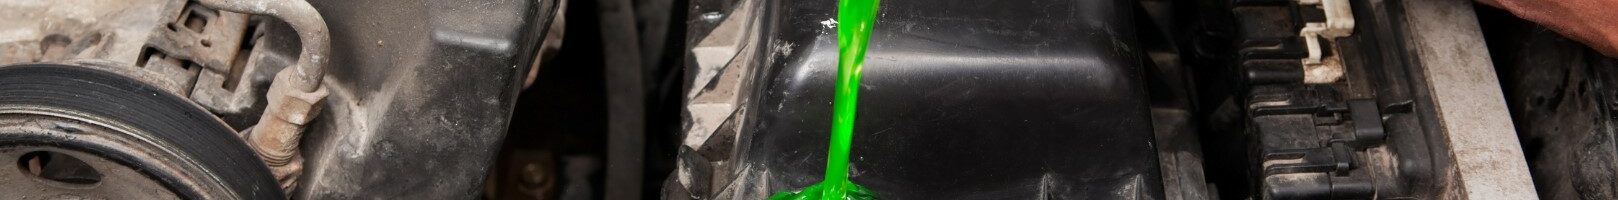 Coolant & Antifreeze: What Are They and Why Does Your Engine Need Them?